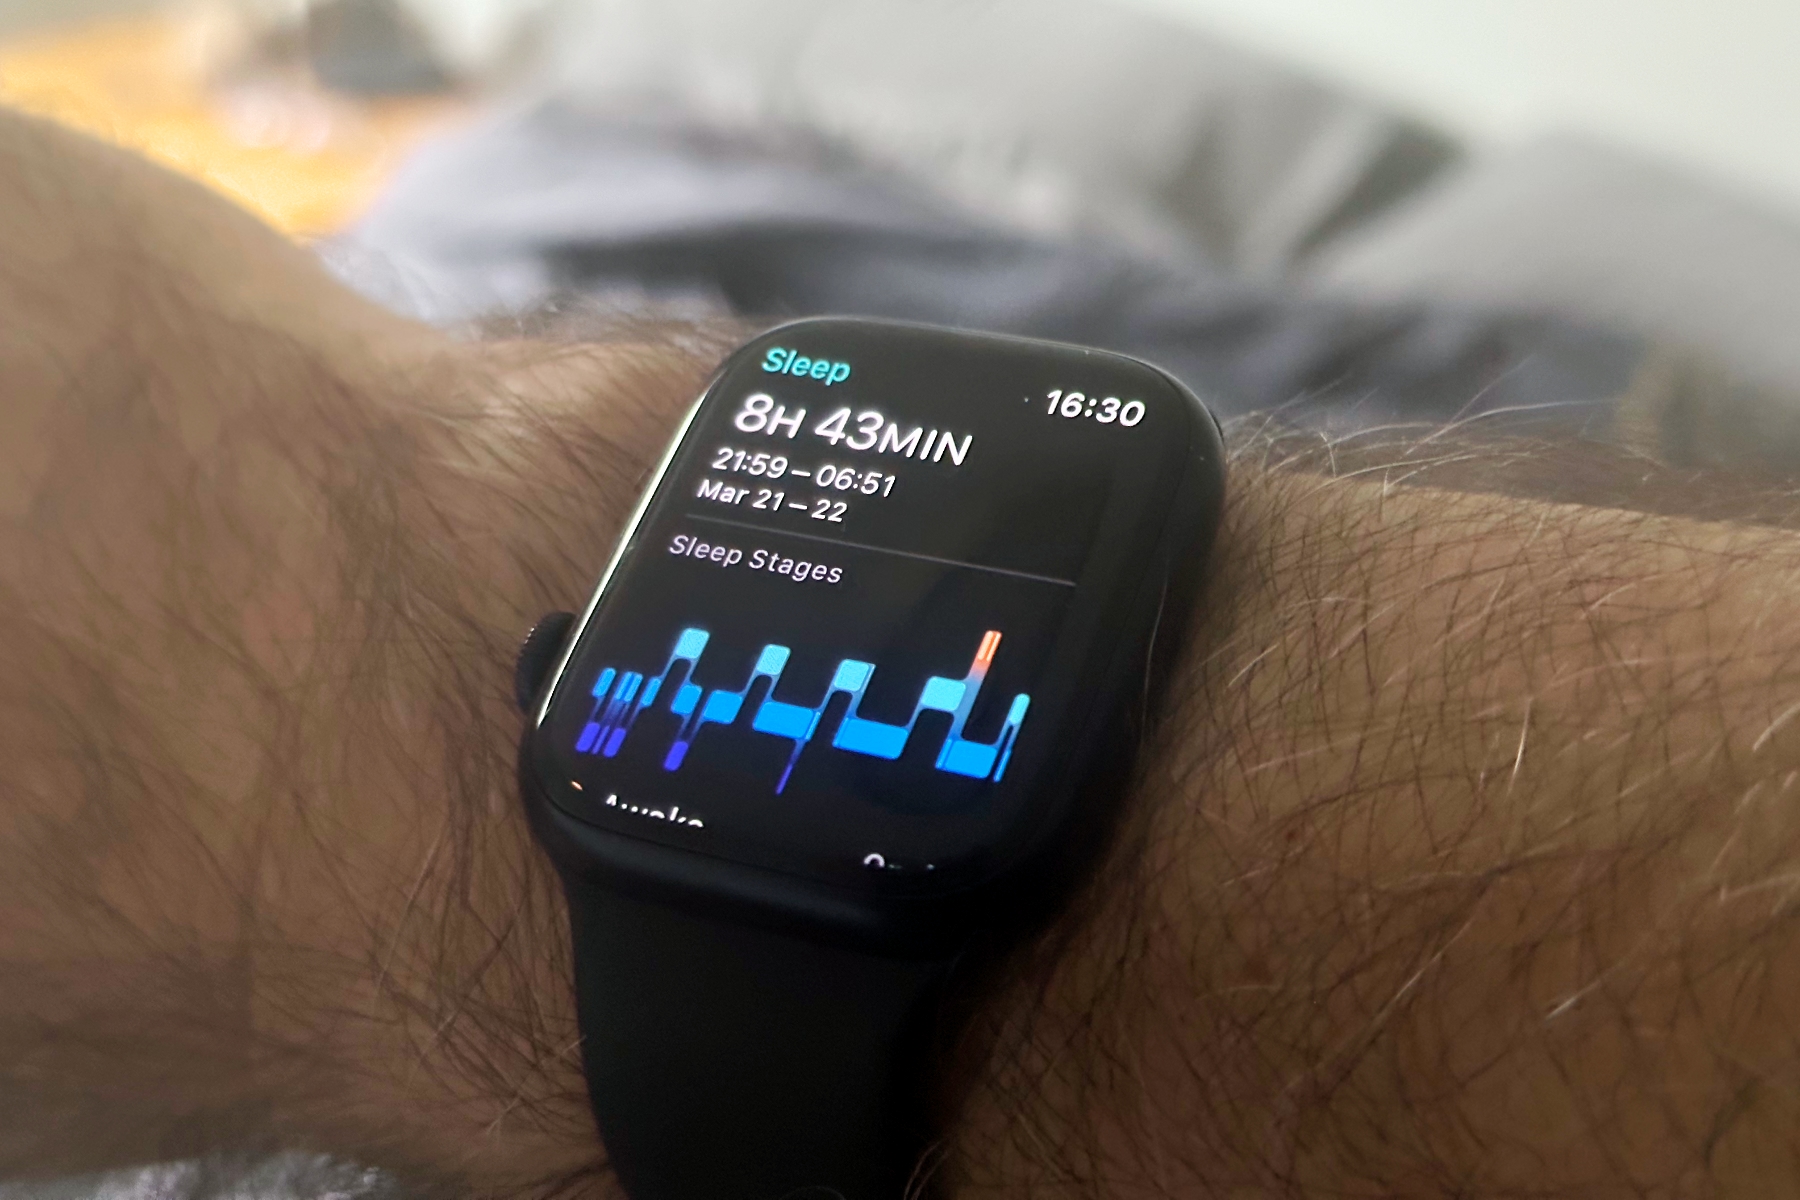 https://www.digitaltrends.com/wp-content/uploads/2023/03/Person-wearing-Apple-Watch-Series-8-showing-sleep-tracking.jpg?fit=720%2C720&p=1